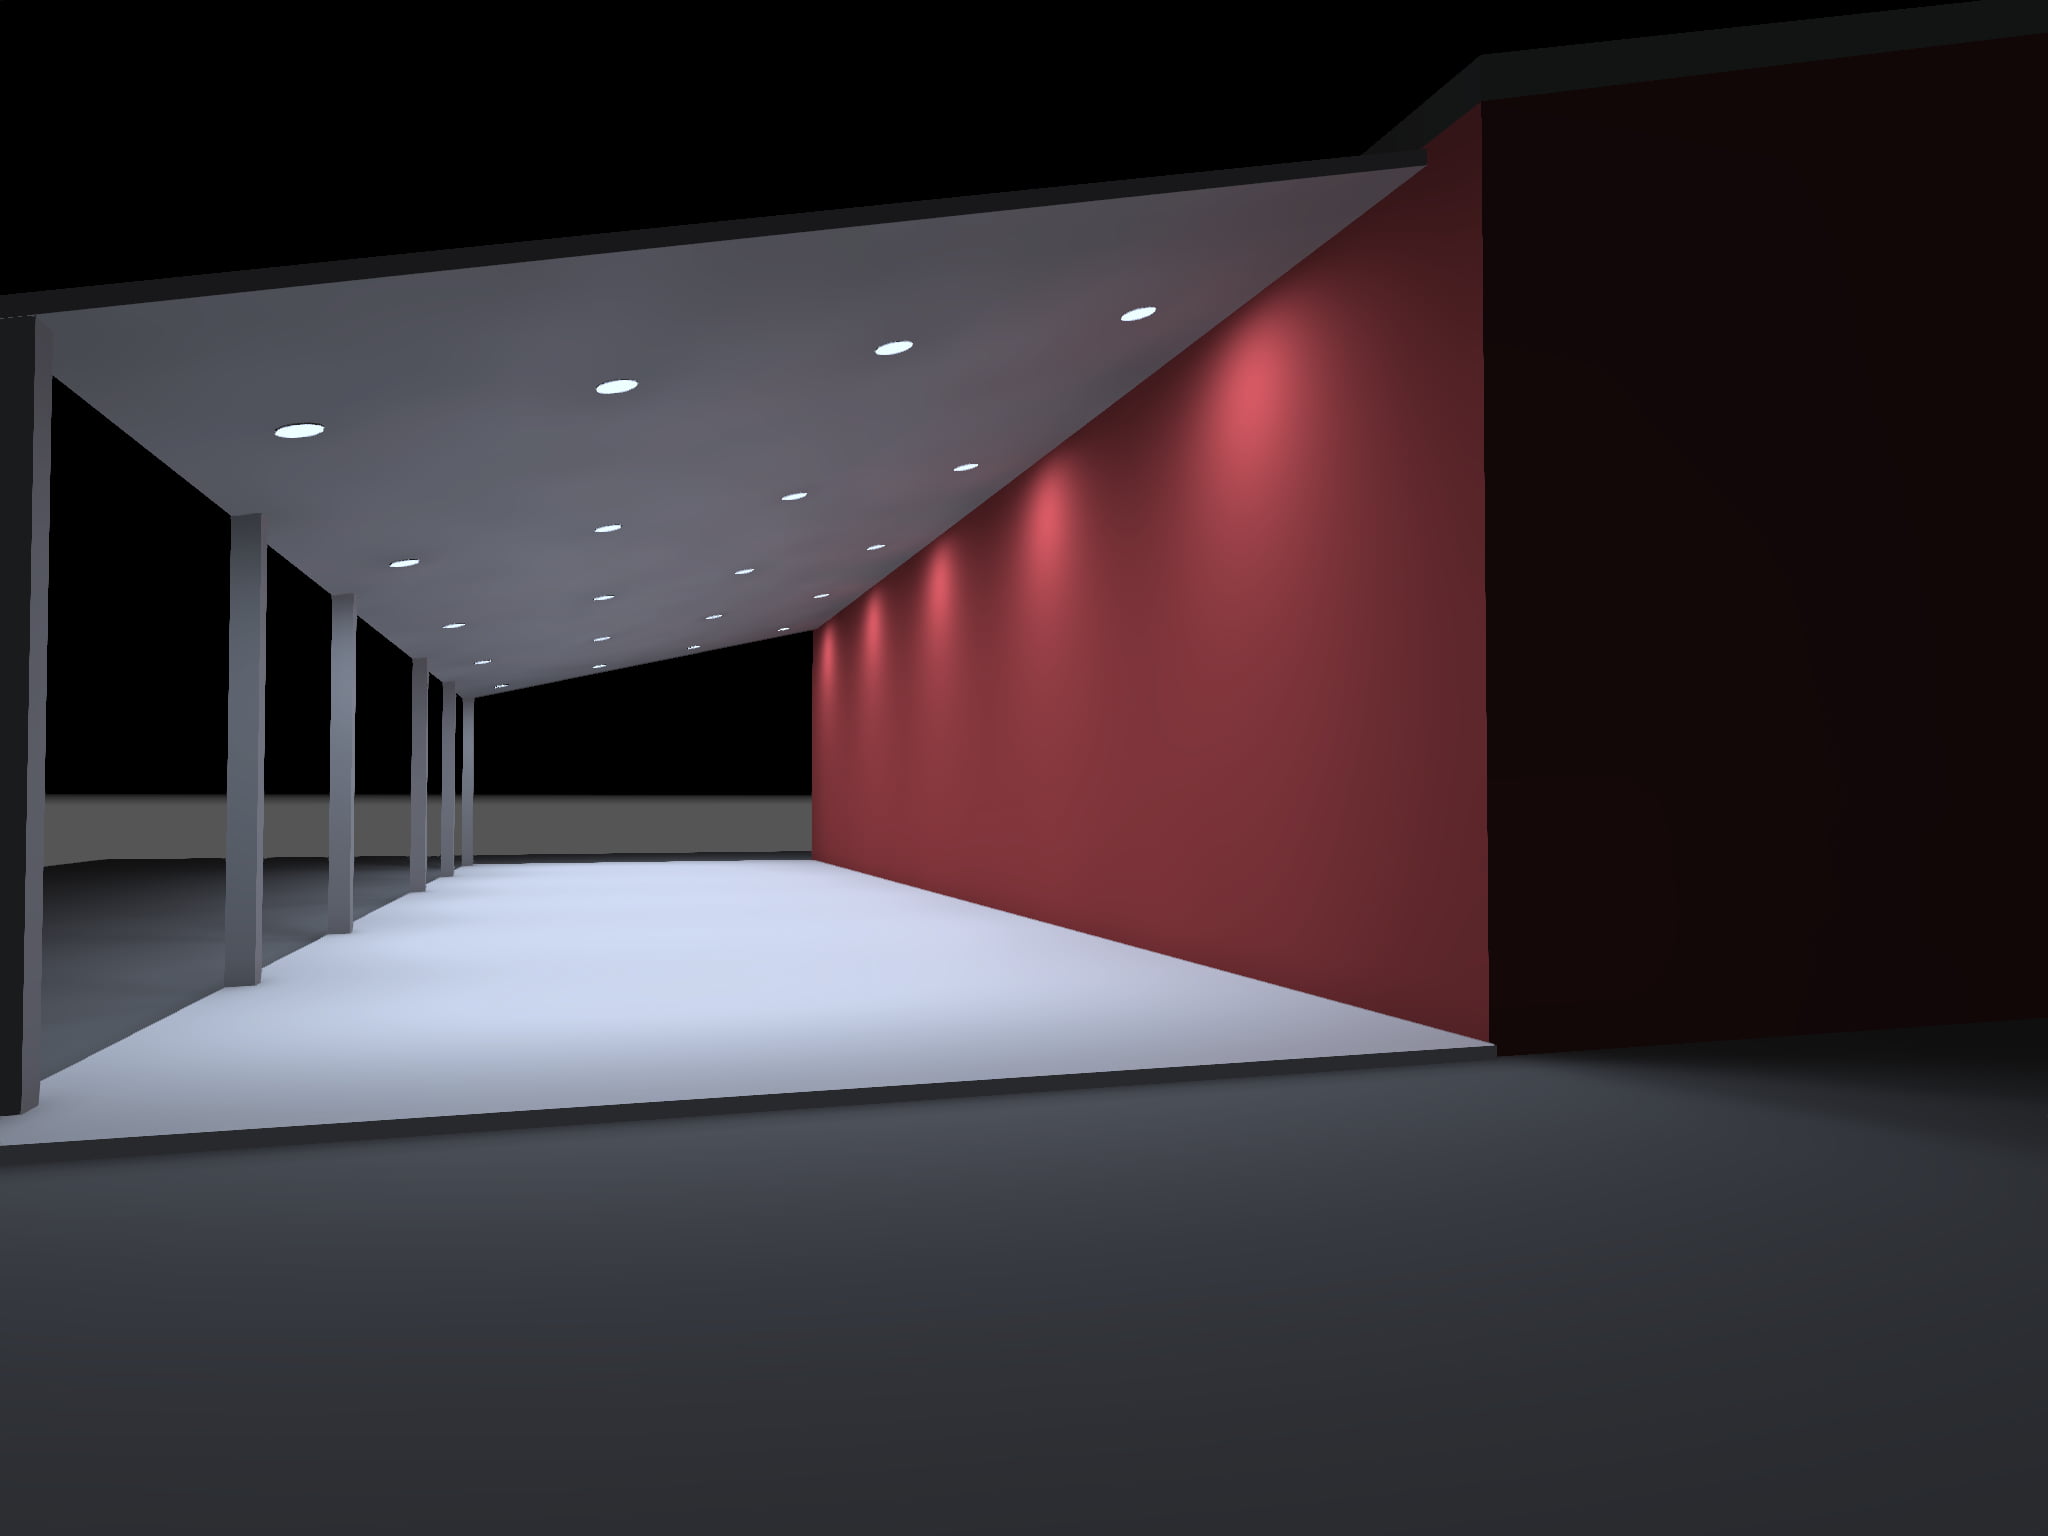 3D design of 20 8 inch recessed downlights illuminating the area beneath a commercial canopy